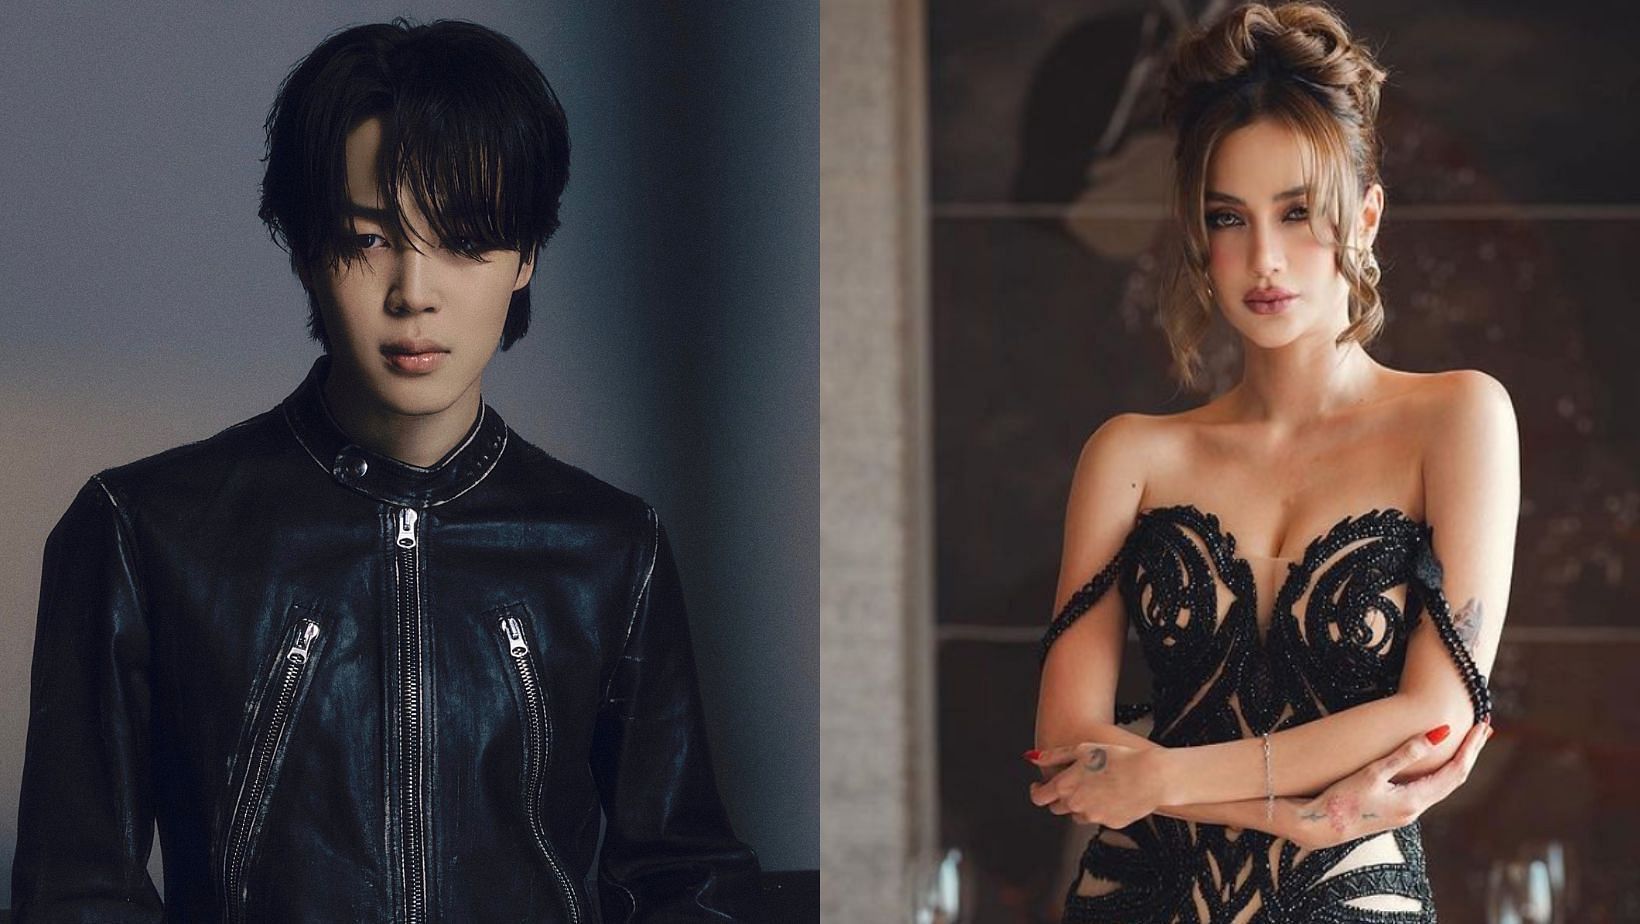 BTS Jimin becomes the comic strip inspiration created by famous Filipino singer and actress Arci Mu&ntilde;oz. (Image via Instagram/@ramonathornes &amp; @bts.bighitofficial)